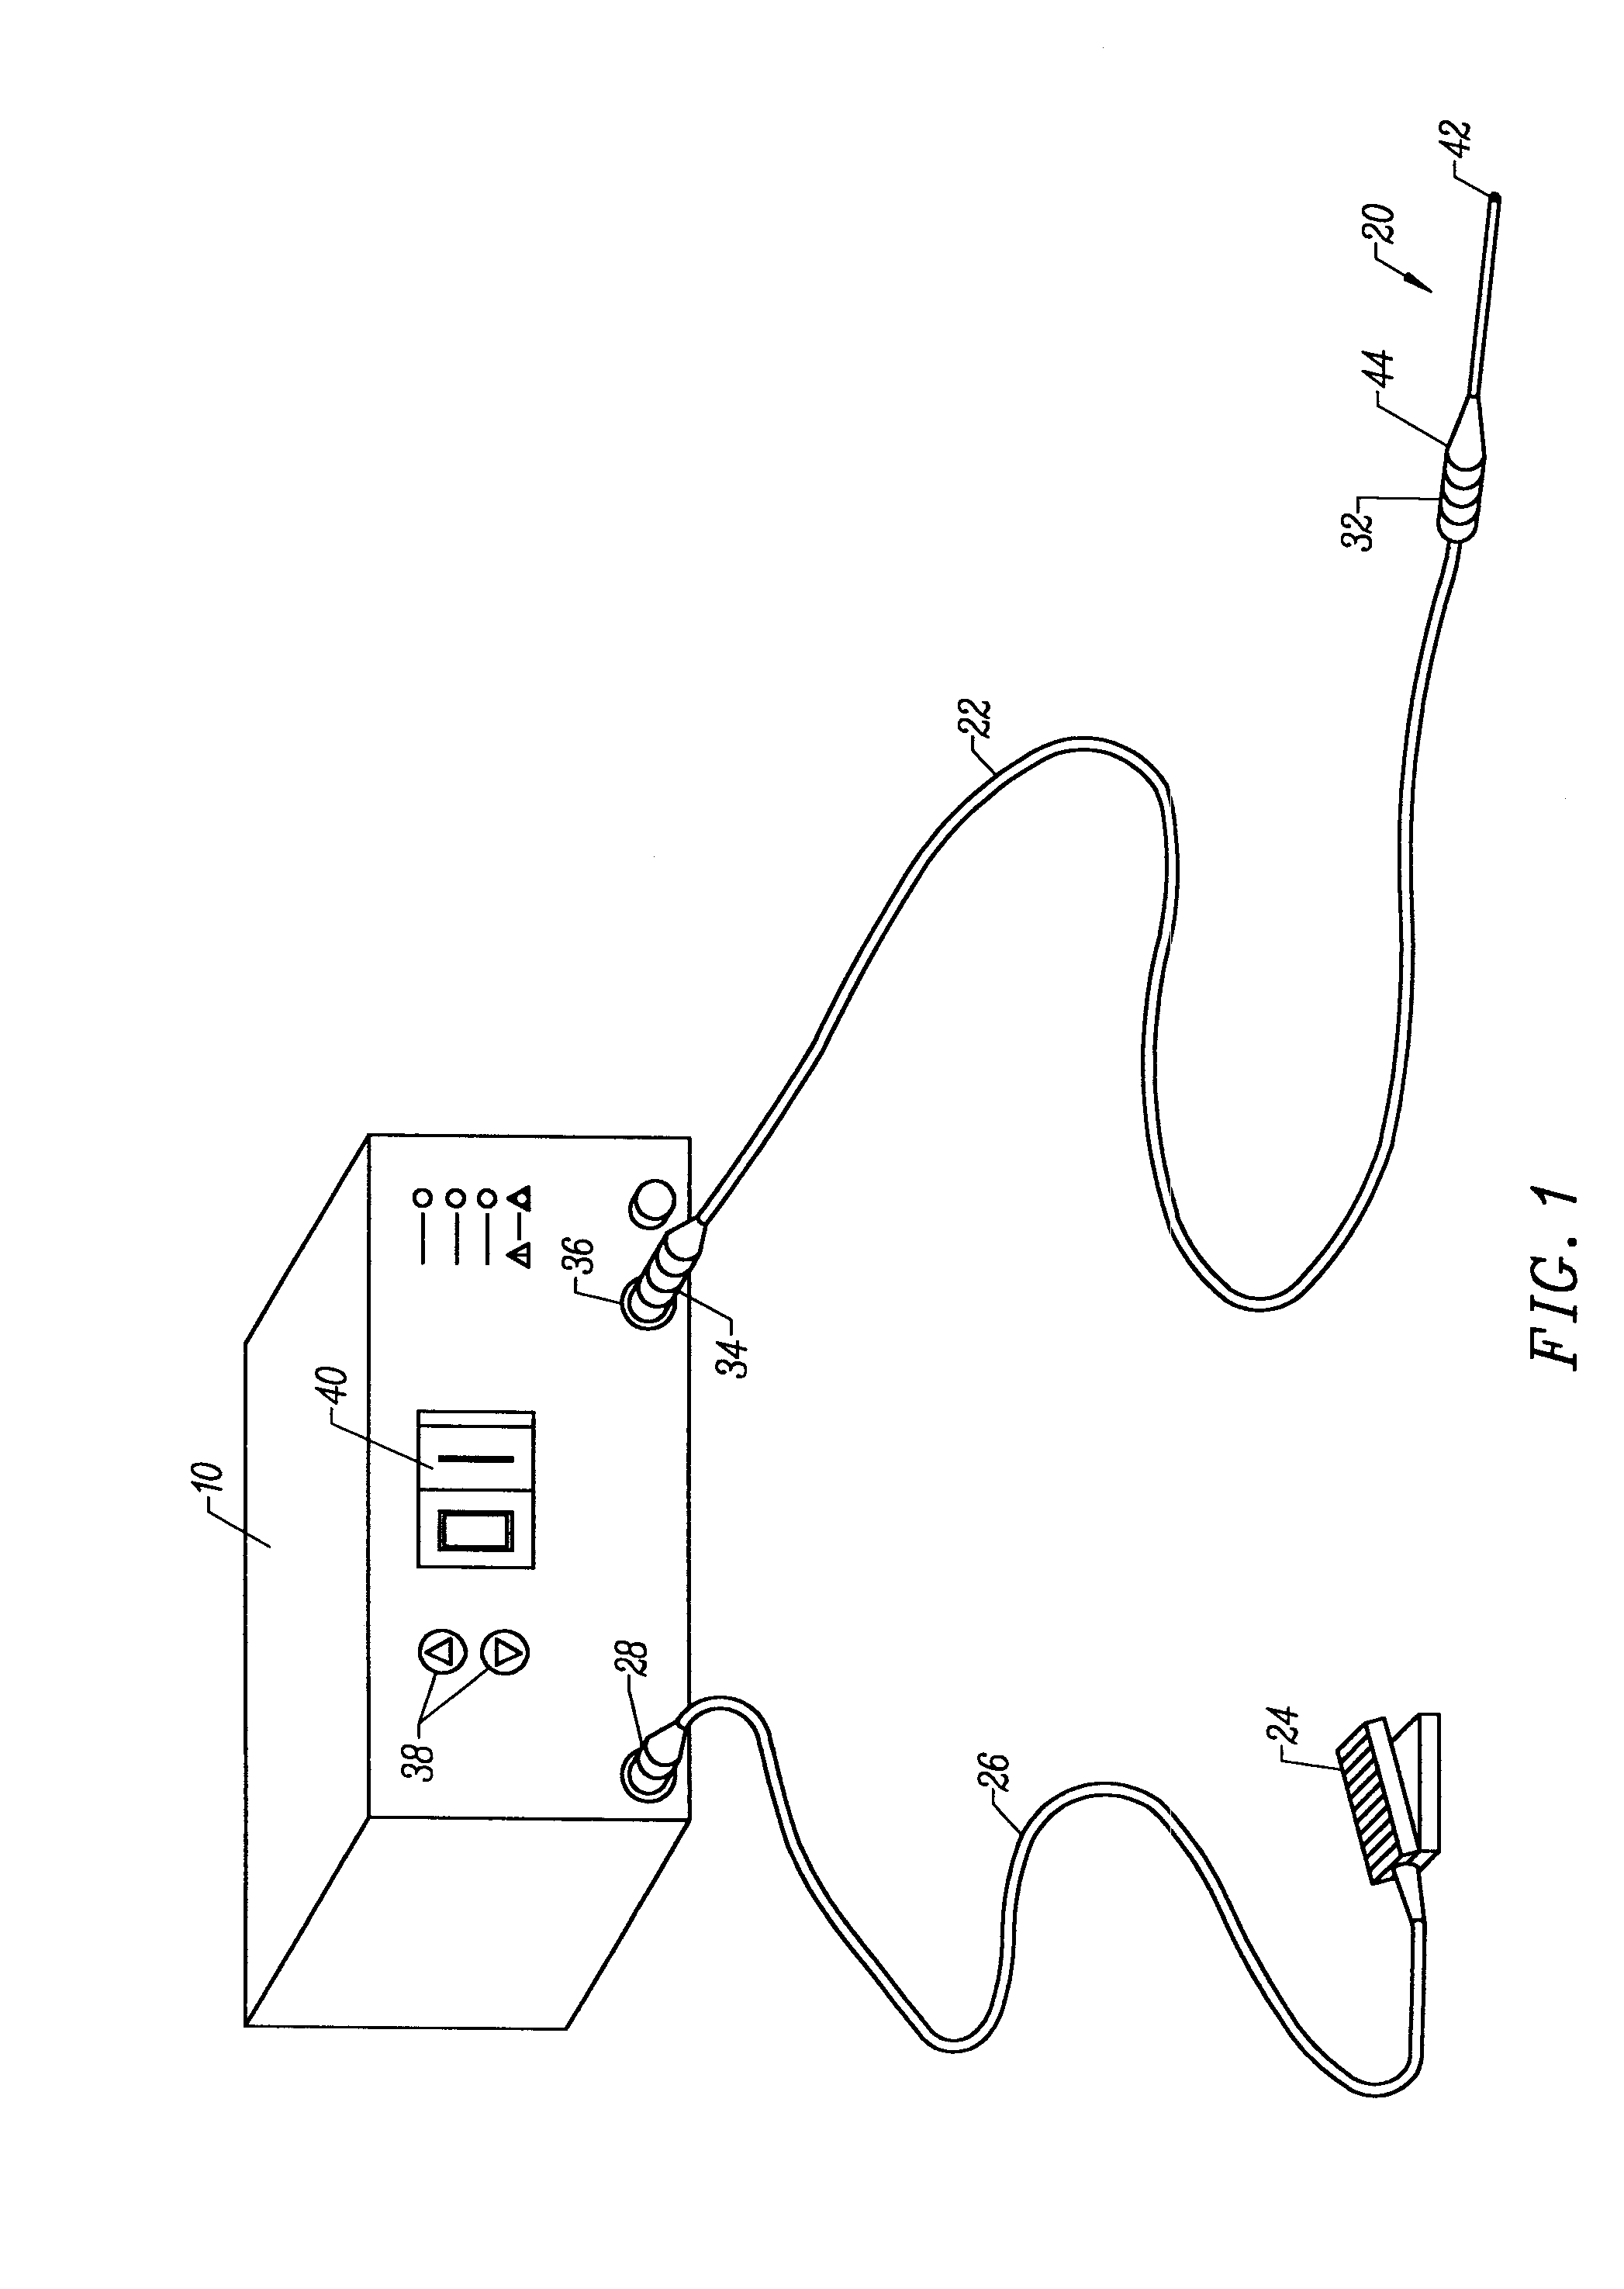 Electrosurgical apparatus and methods for laparoscopy